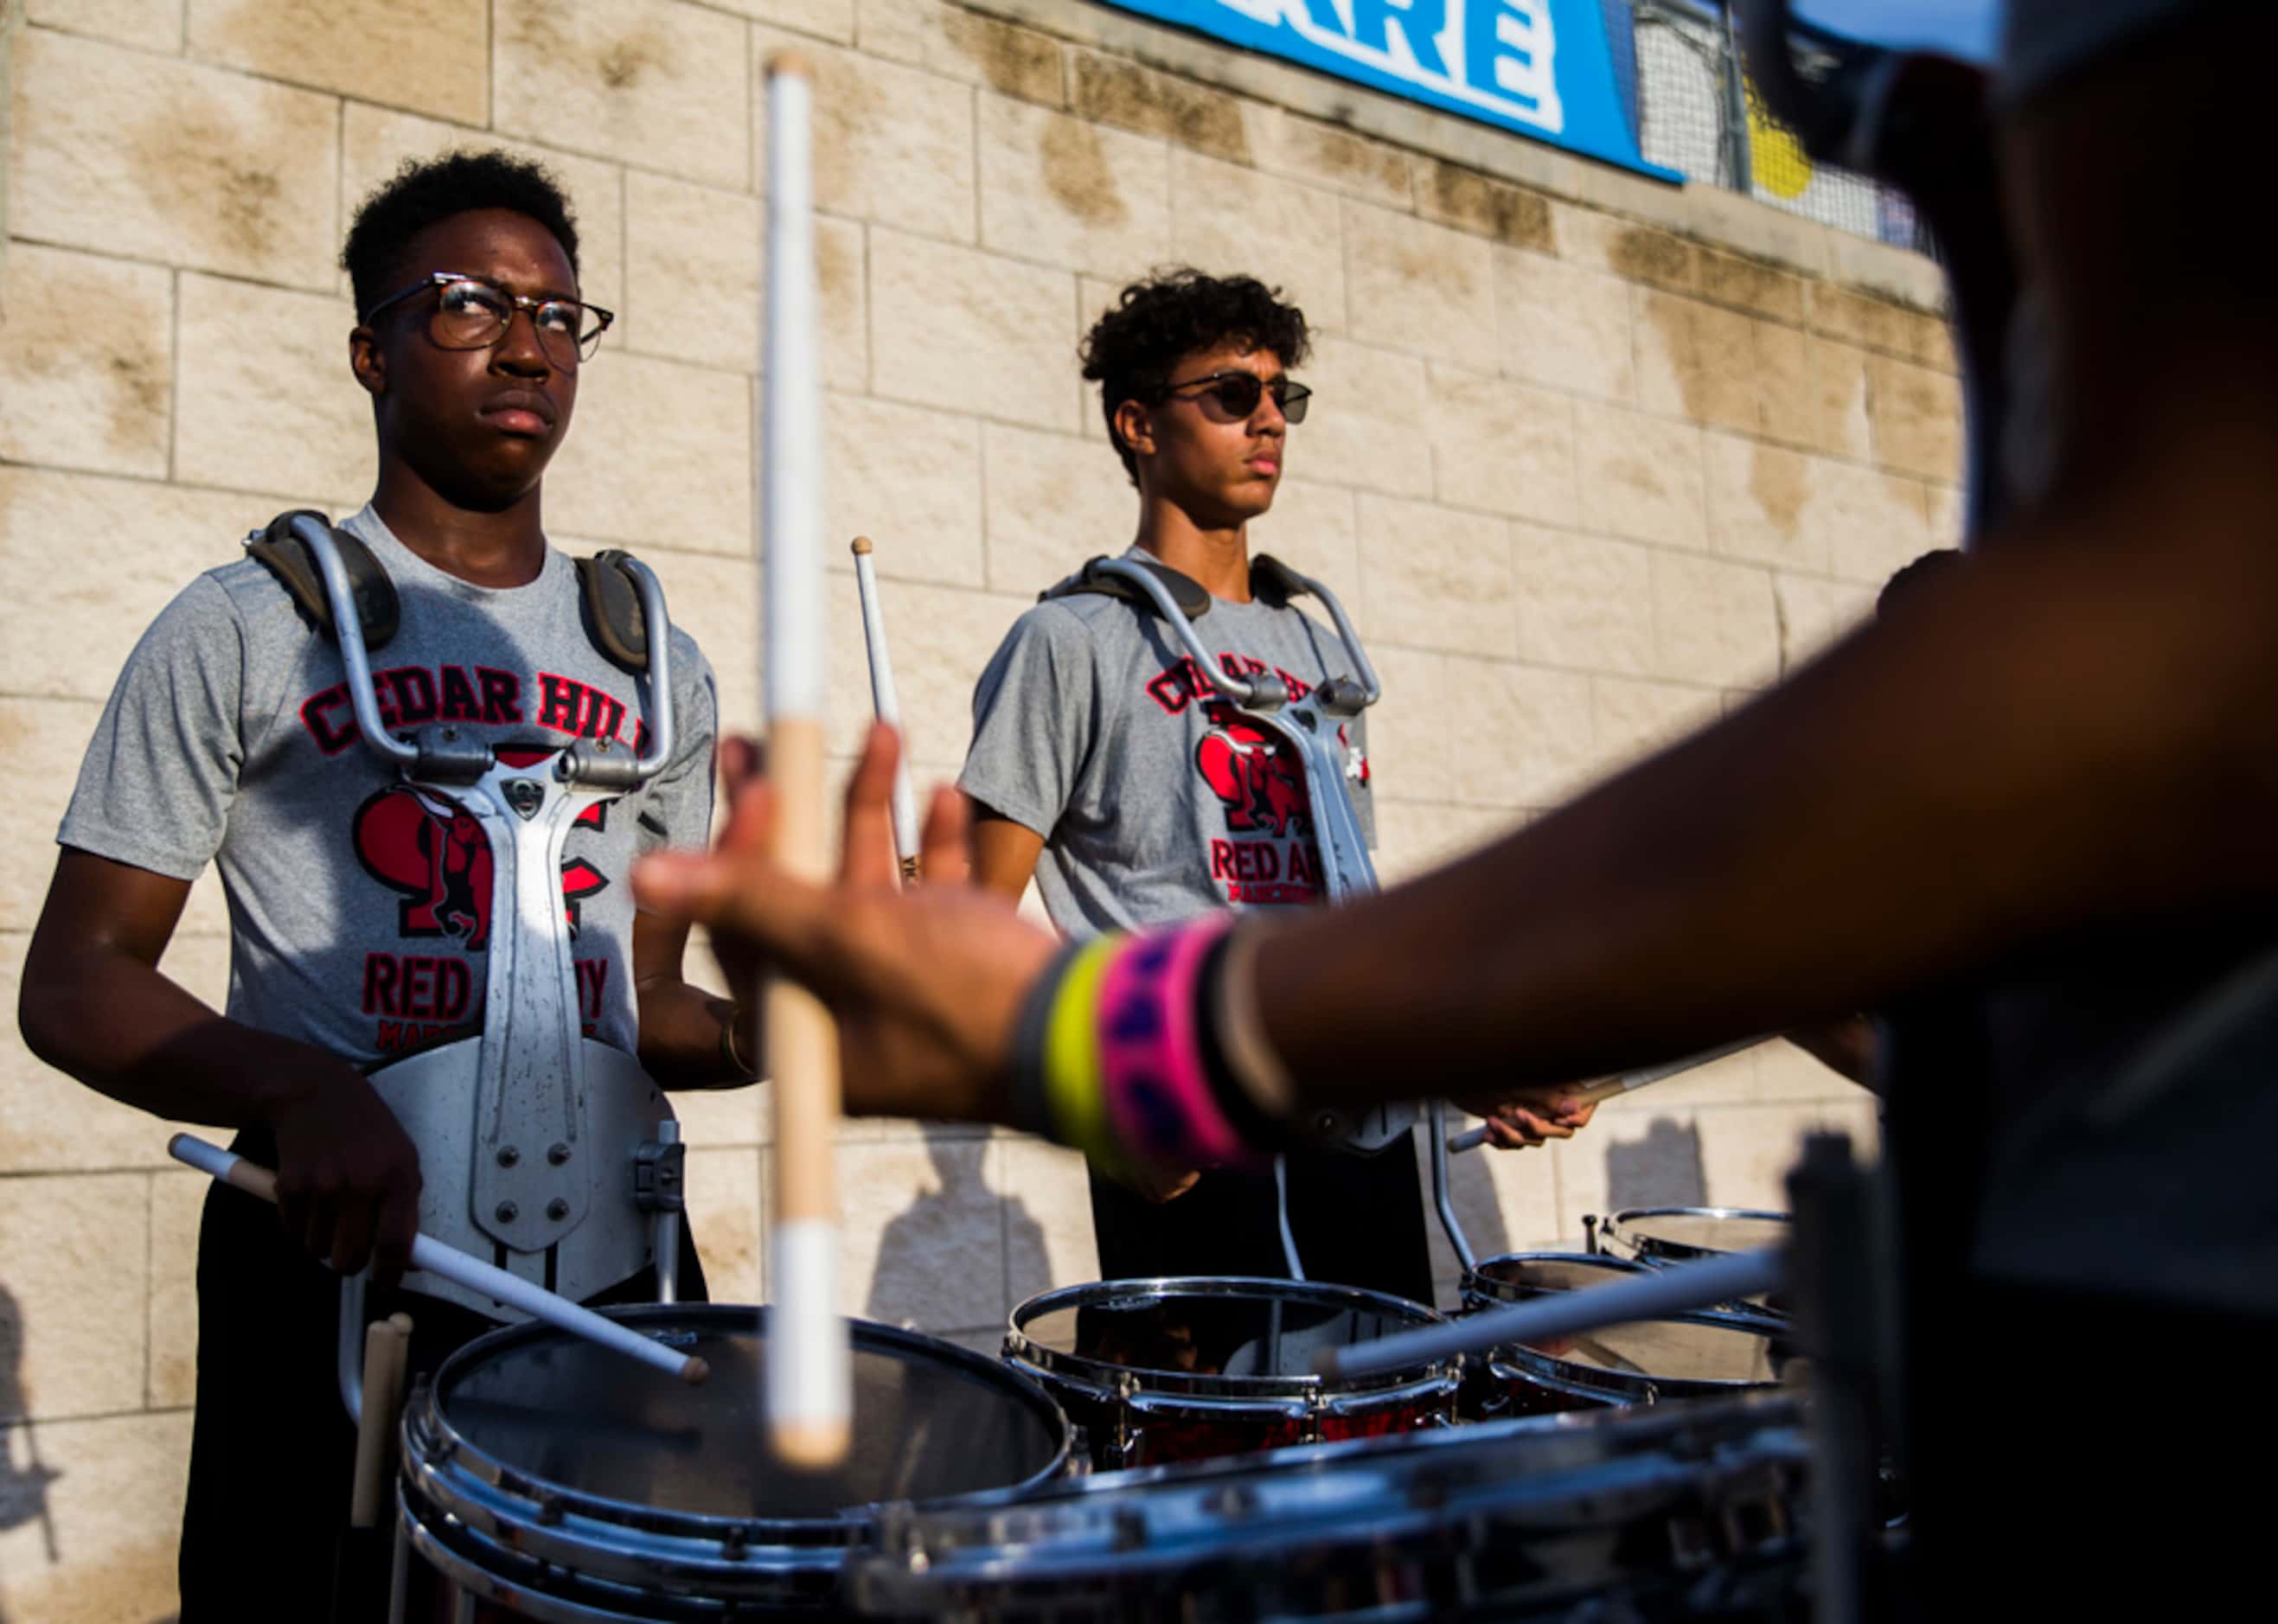 Cedar Hill snare drummers play on the sideline before a high school football game between...